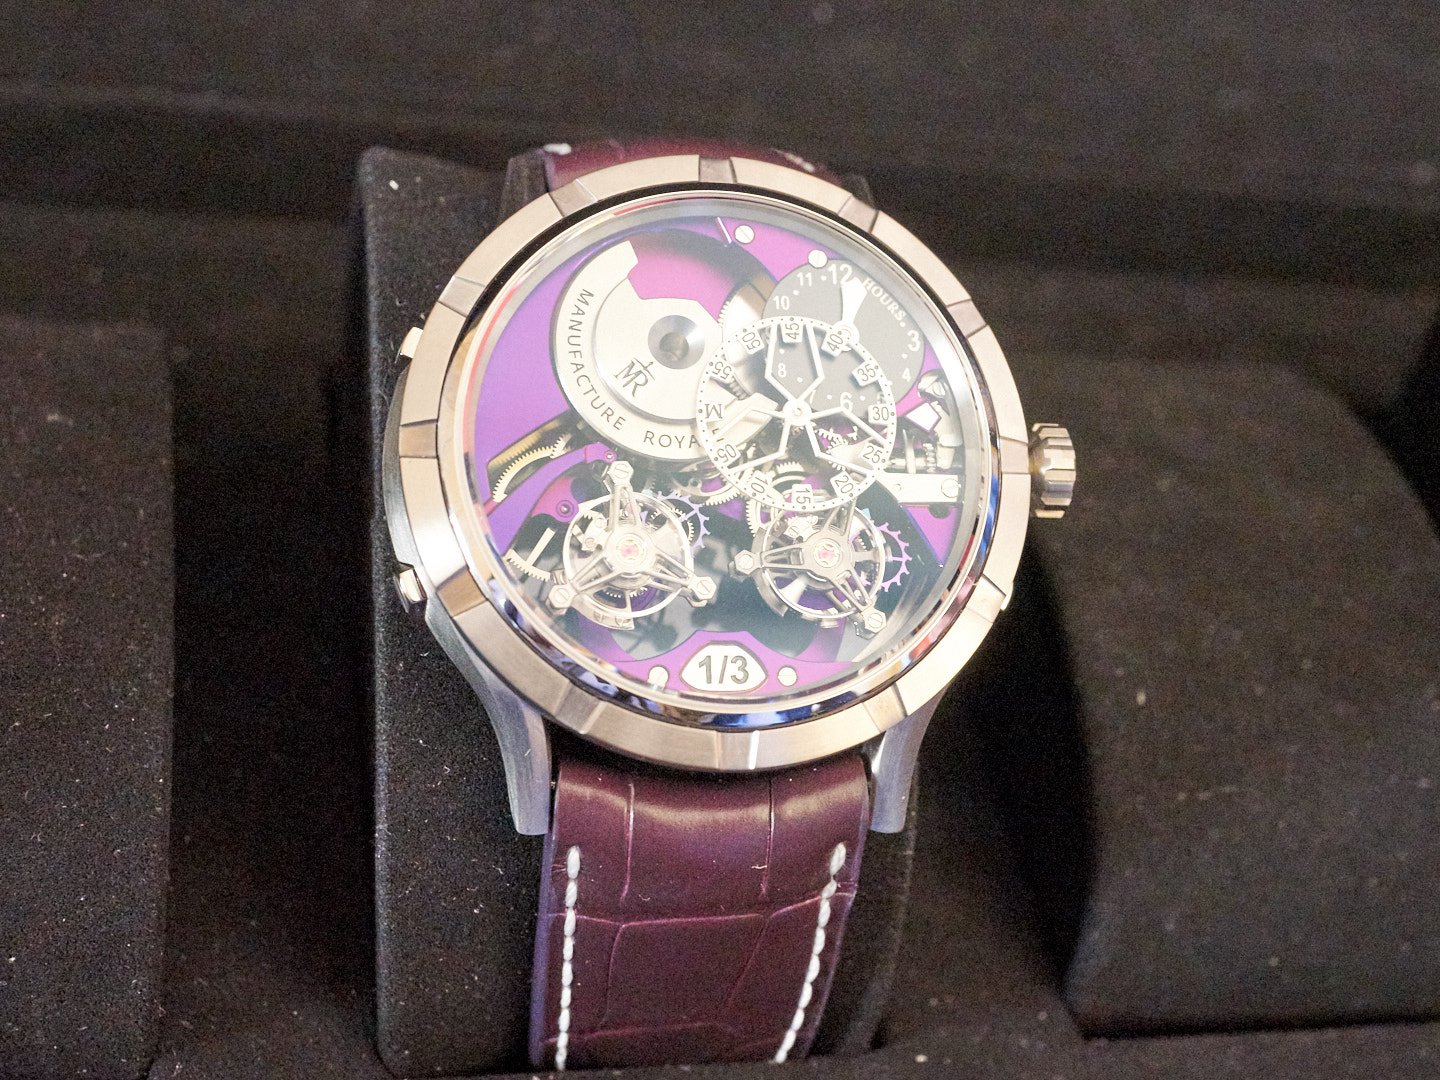 Manufacture Royale event at BEAU-RIVAGE Geneve